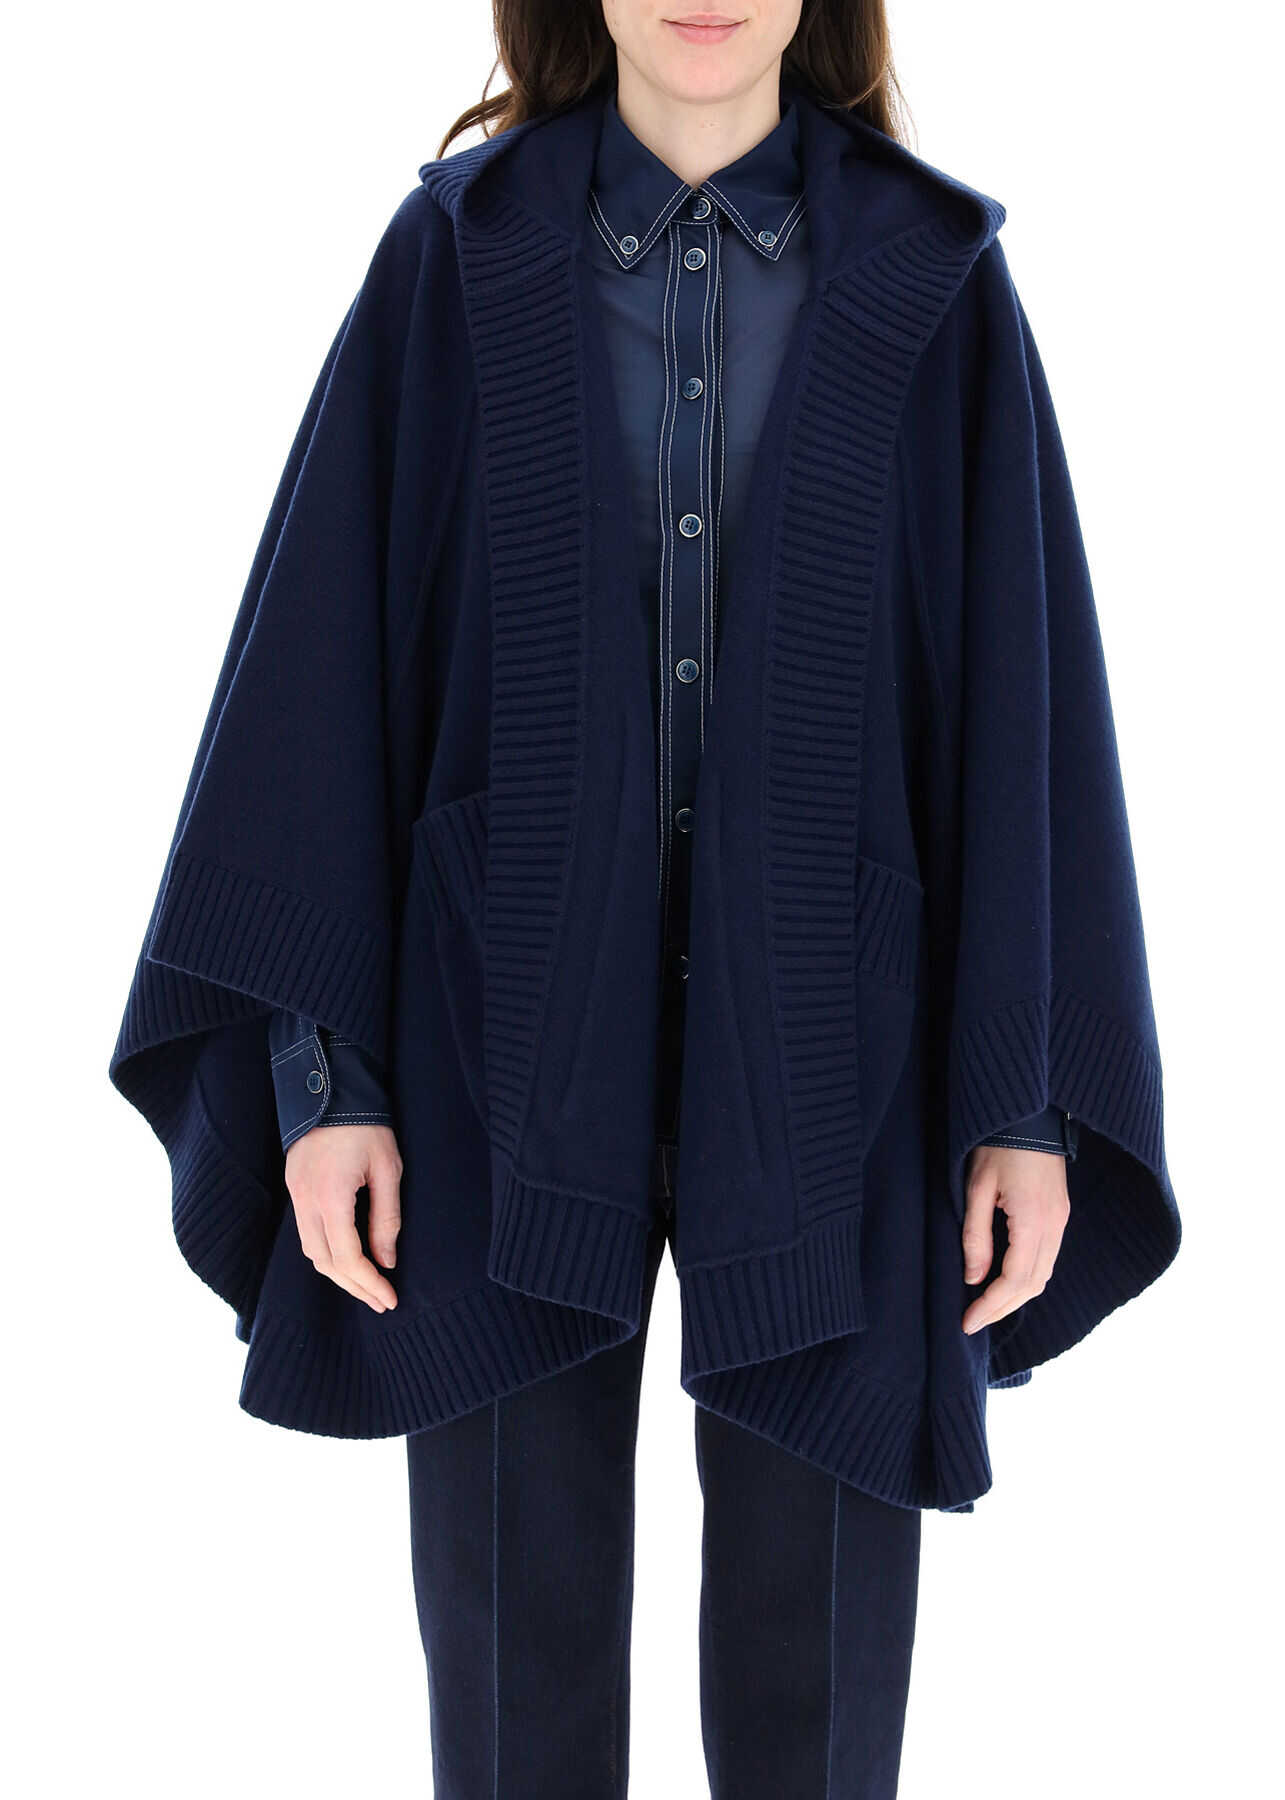 Burberry Cape With Emblem Inlay 4078523 NAVY image0